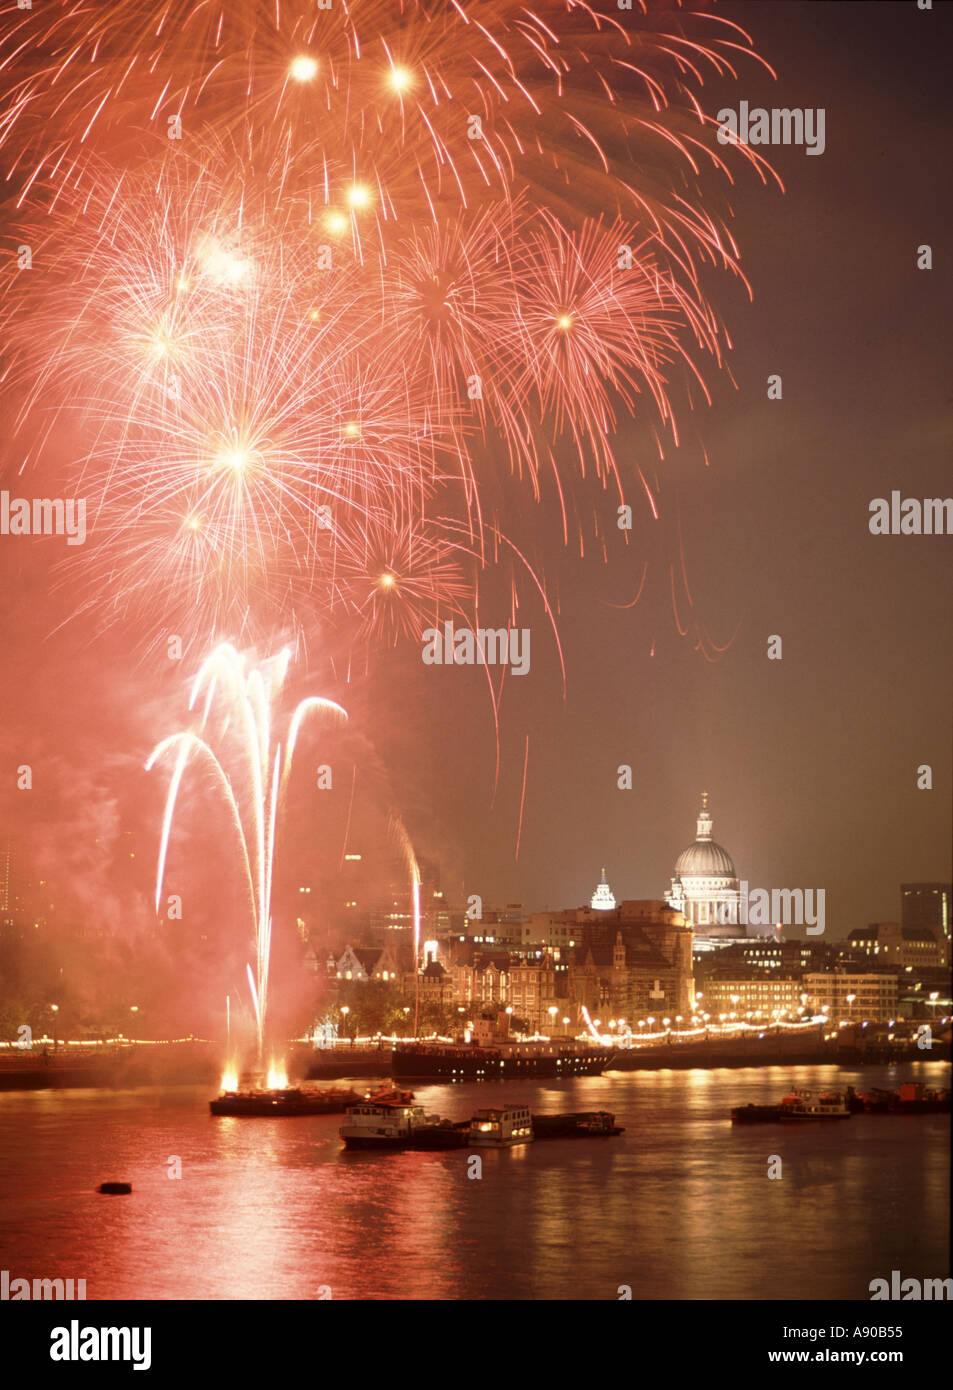 River Thames City of London and floodlit St Pauls cathedral archival skyline forming backdrop to Lord Mayors Show fireworks display England UK Stock Photo